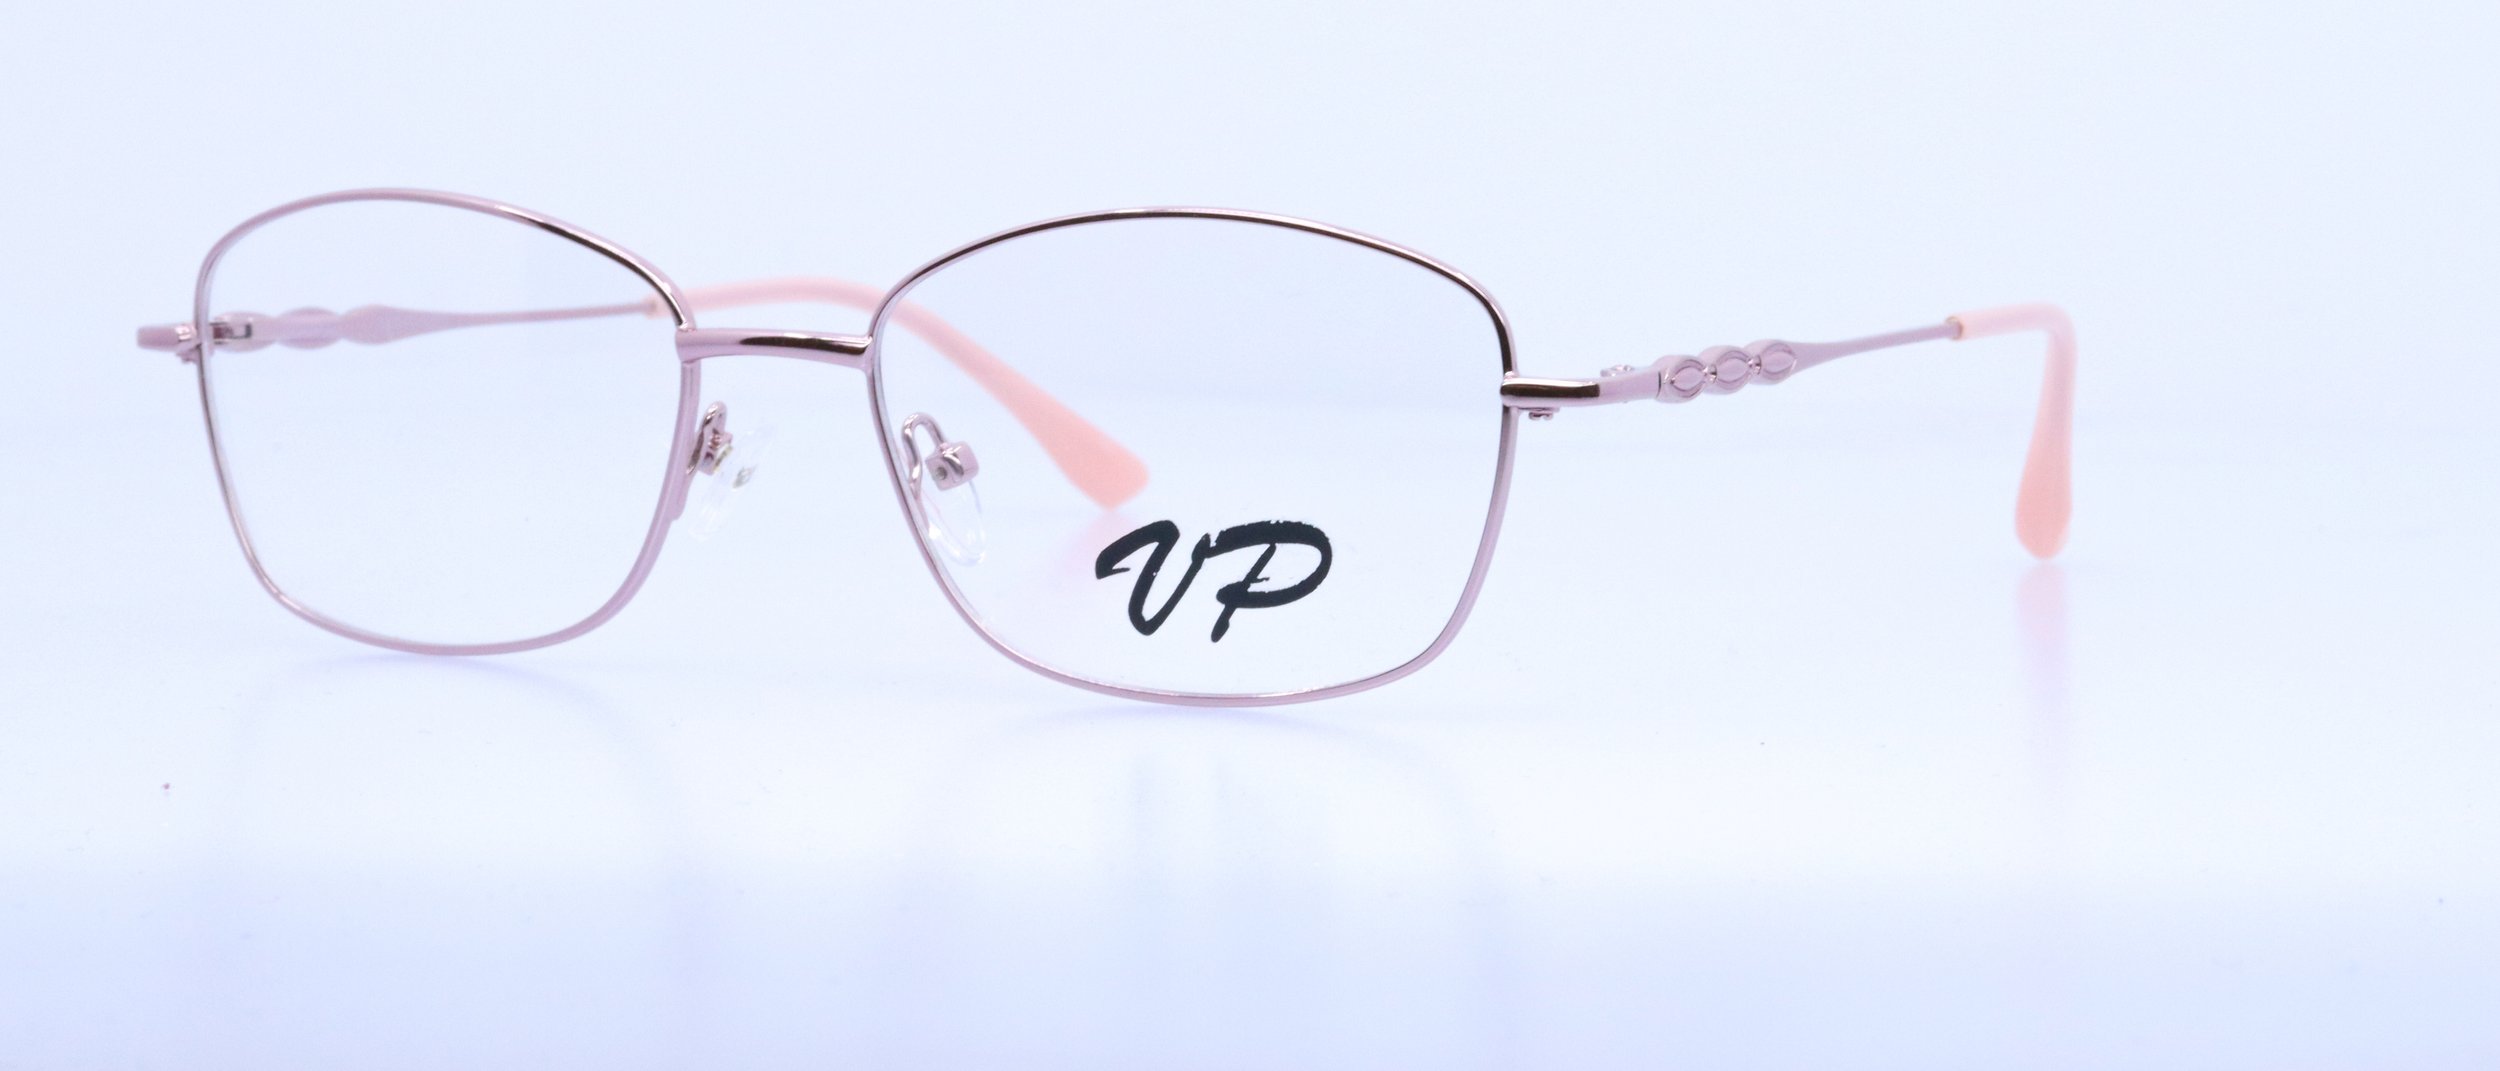  NEW!! VP161: 54-17-140, Available in Blush or Honey 